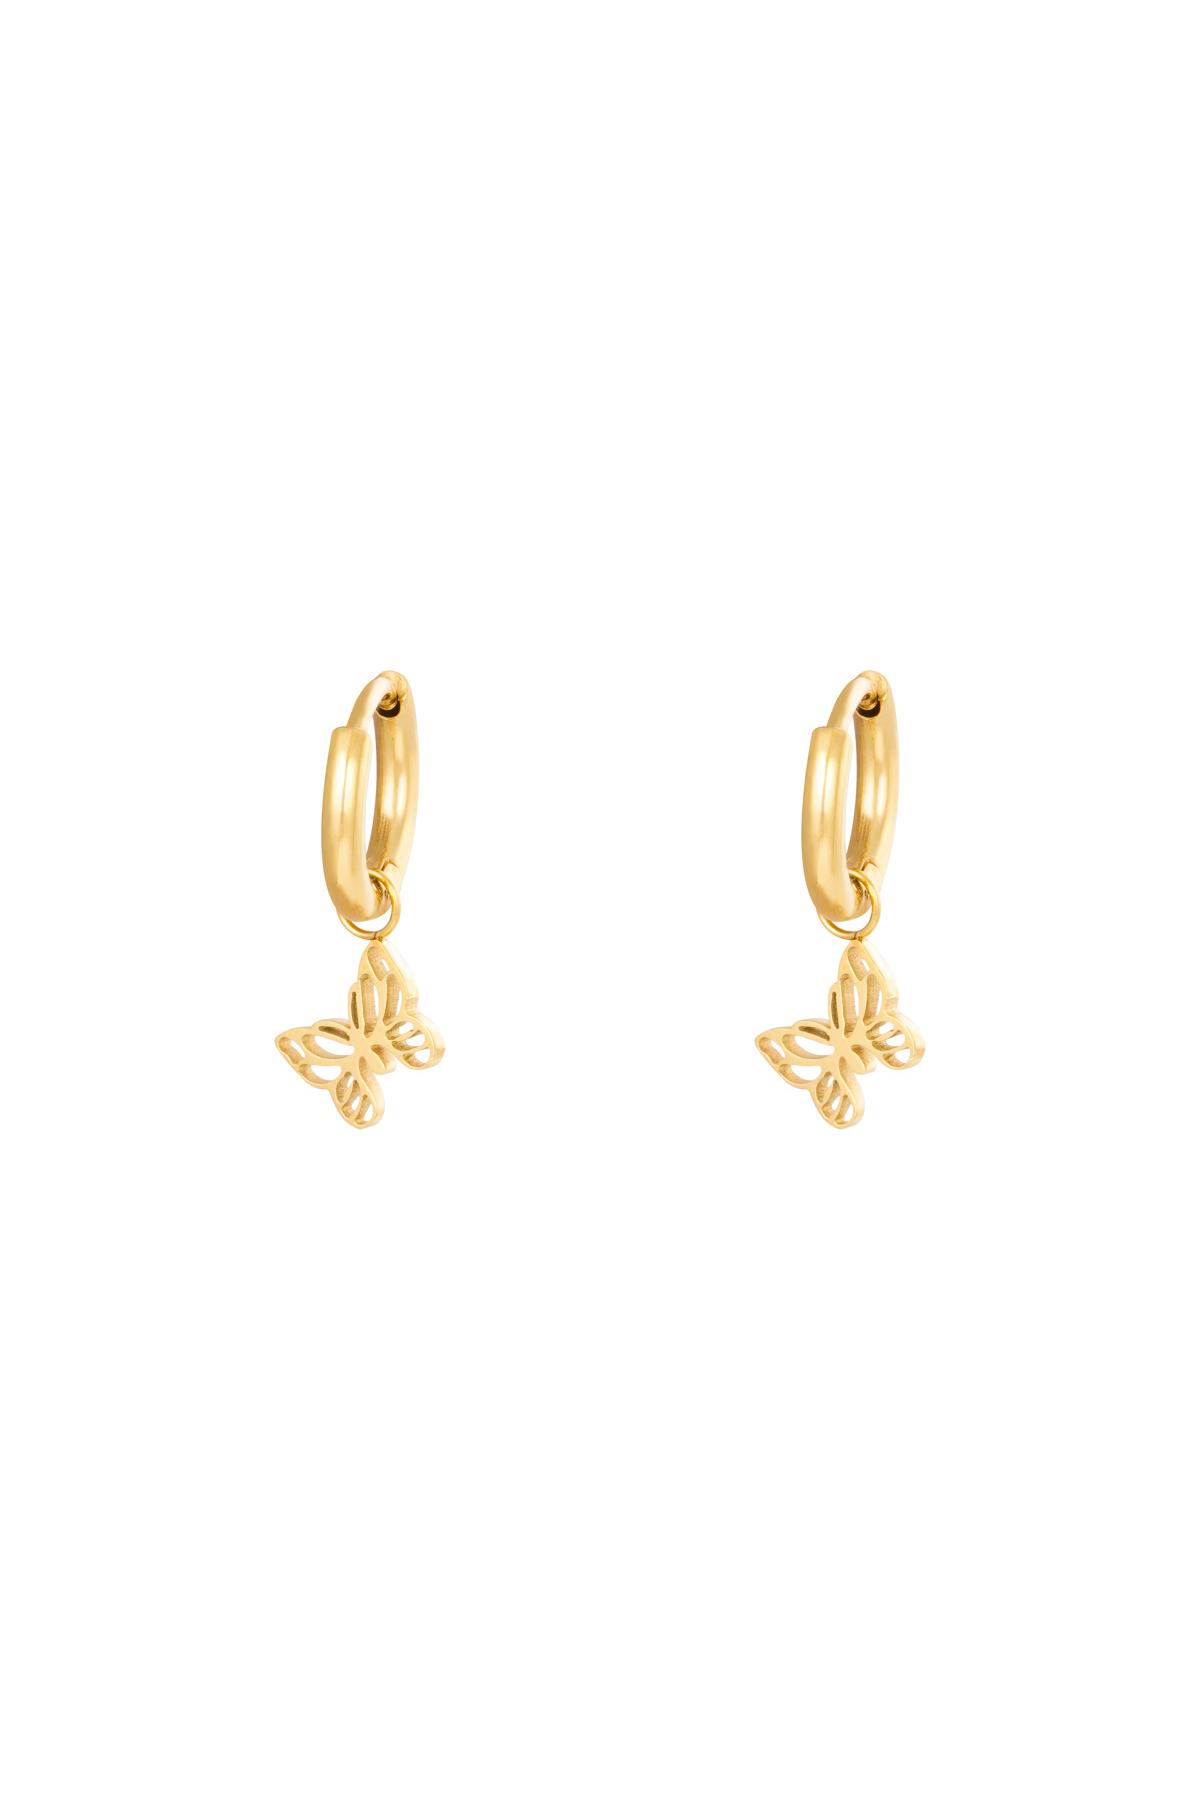 Or / Boucles d'oreilles Floating Butterfly Acier inoxydable 